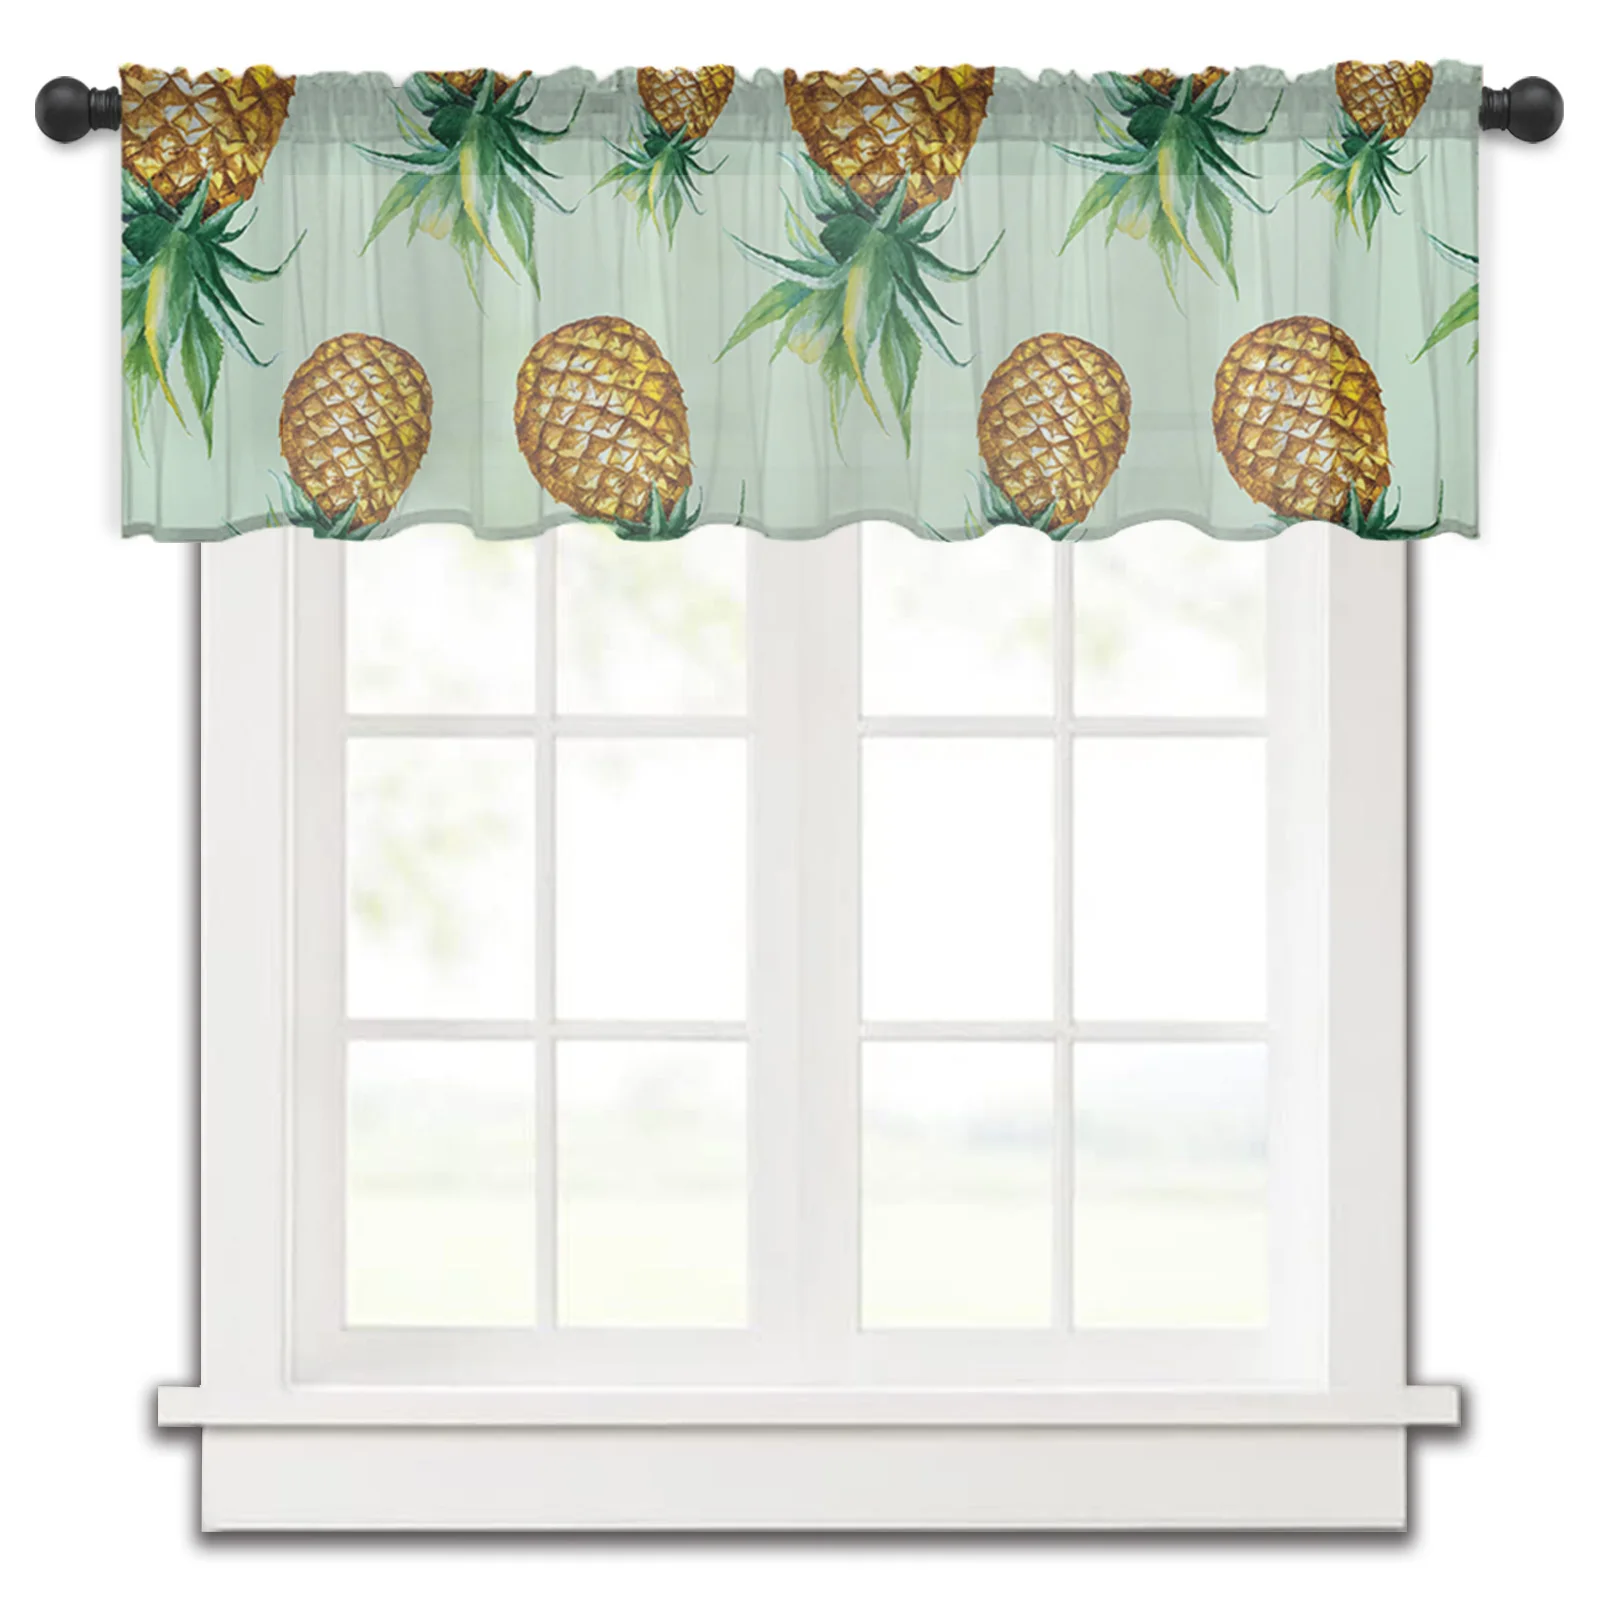 

Tropical Fruit Pineapple Kitchen Small Window Curtain Tulle Sheer Short Curtain Bedroom Living Room Home Decor Voile Drapes